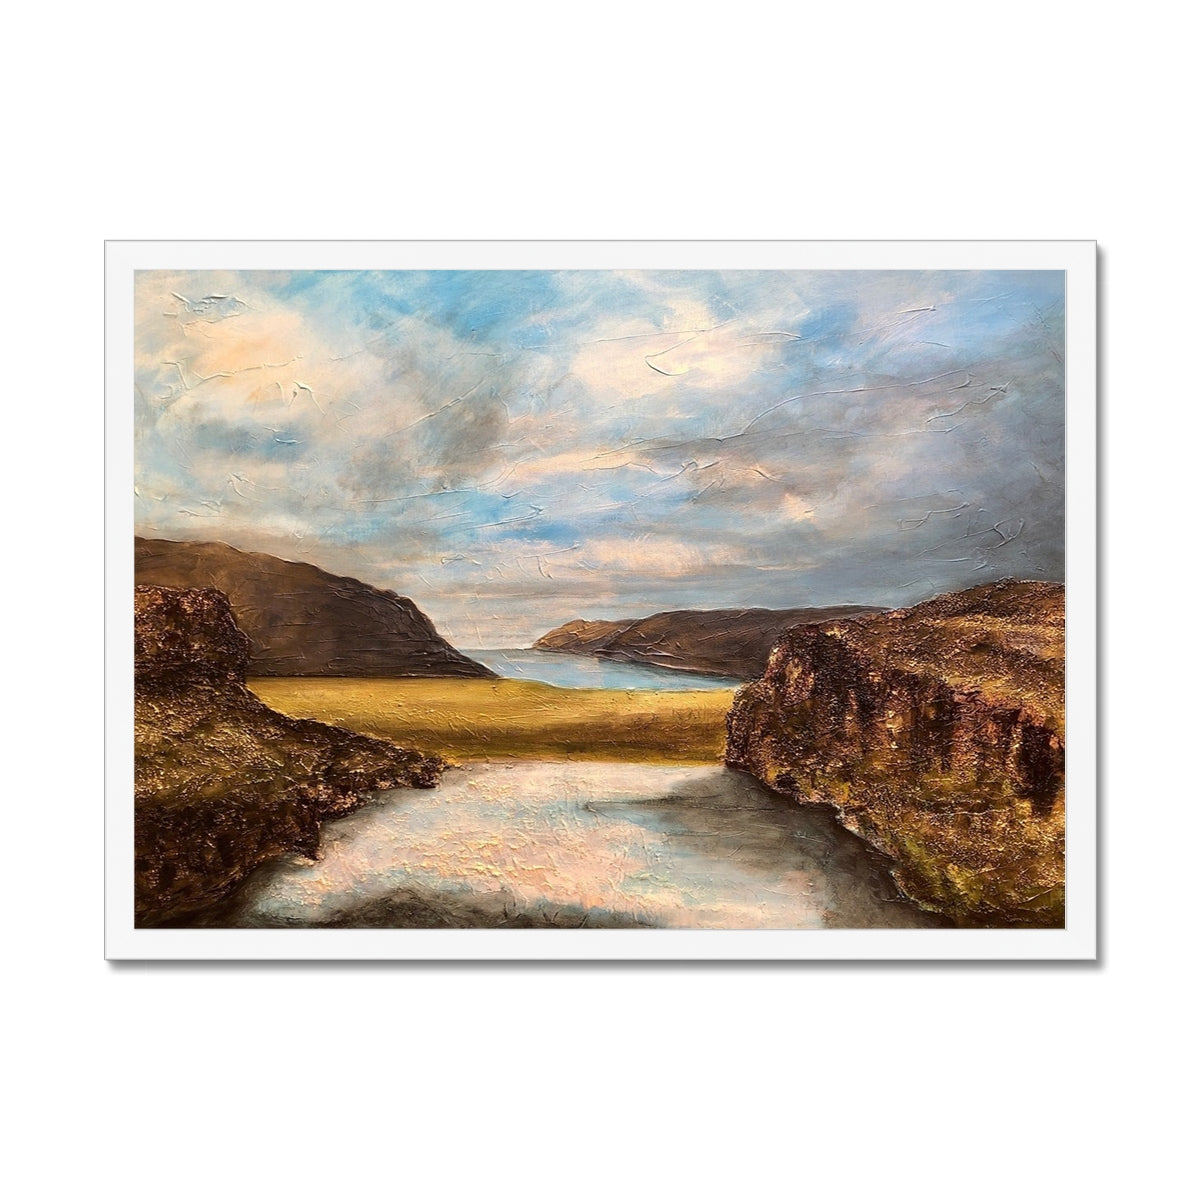 Westfjords Iceland Painting | Framed Prints From Scotland-Framed Prints-World Art Gallery-A2 Landscape-White Frame-Paintings, Prints, Homeware, Art Gifts From Scotland By Scottish Artist Kevin Hunter